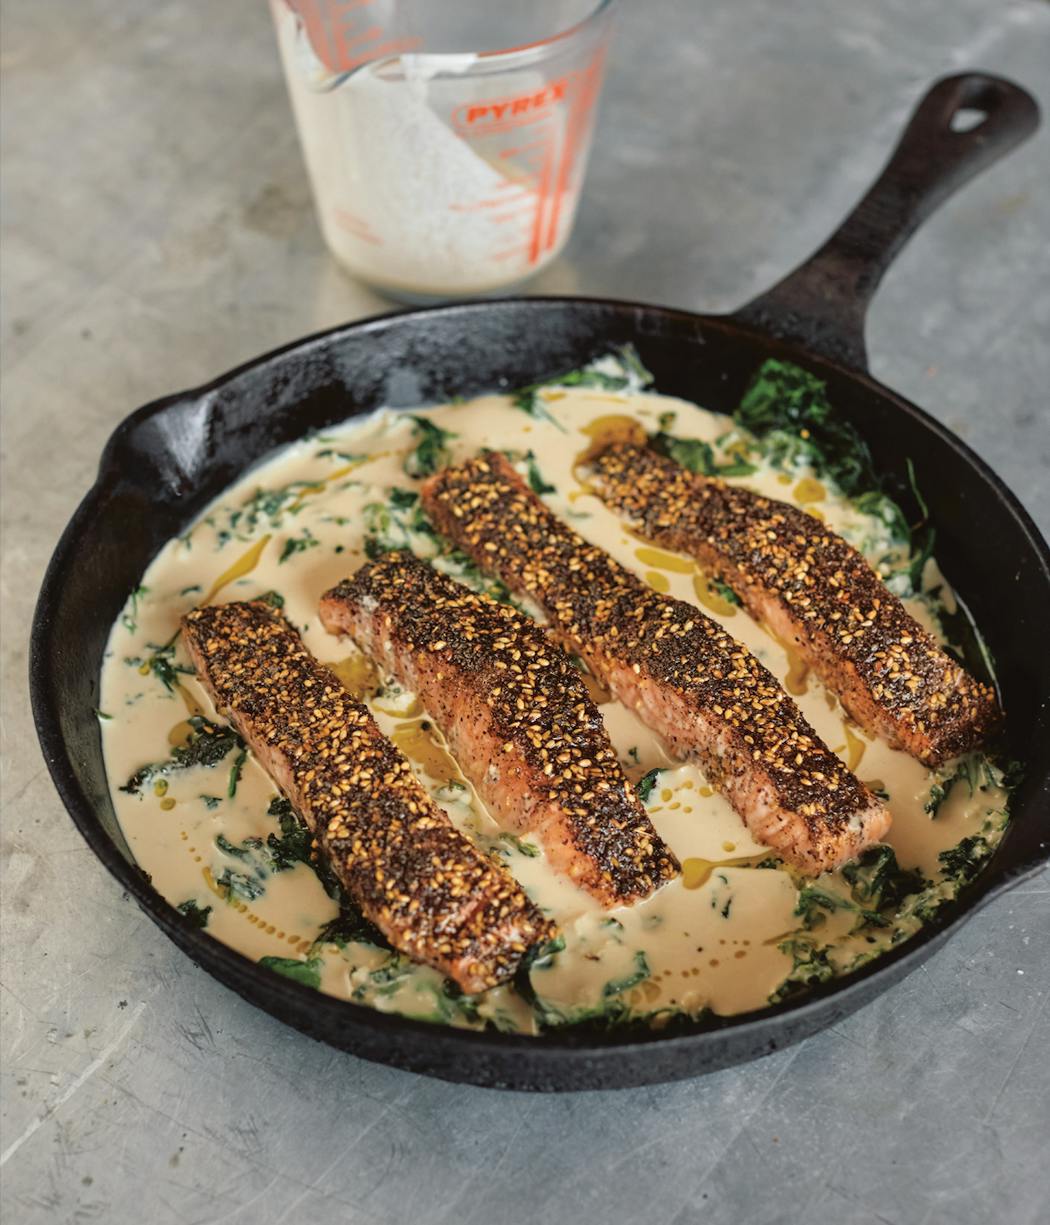 Za’atar creates a flavor-packed crust and a new way to dress up a weeknight salmon dinner.